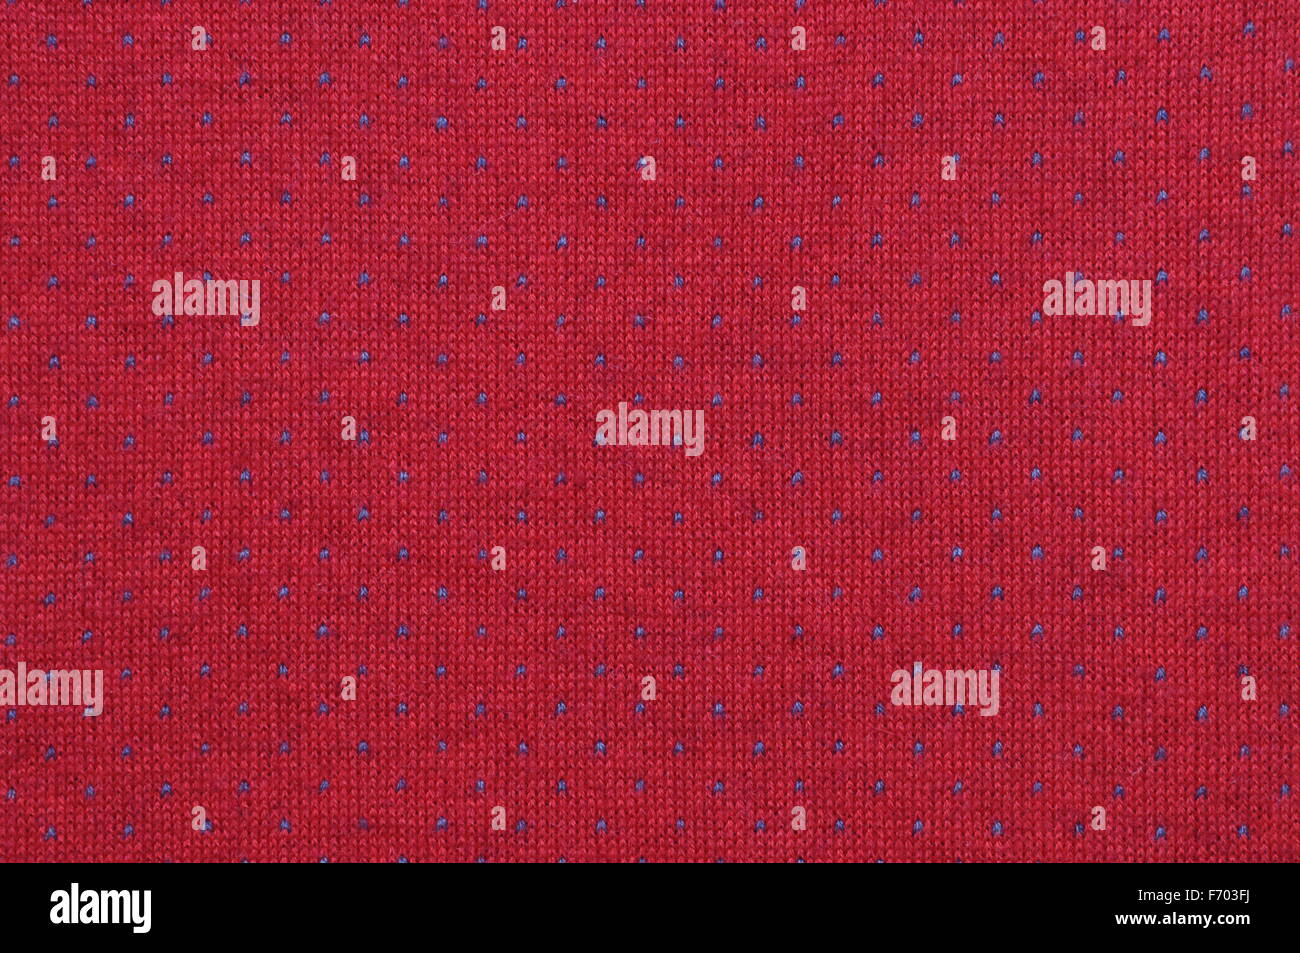 Abstract background, blue and red knitted fabric texture Stock Photo